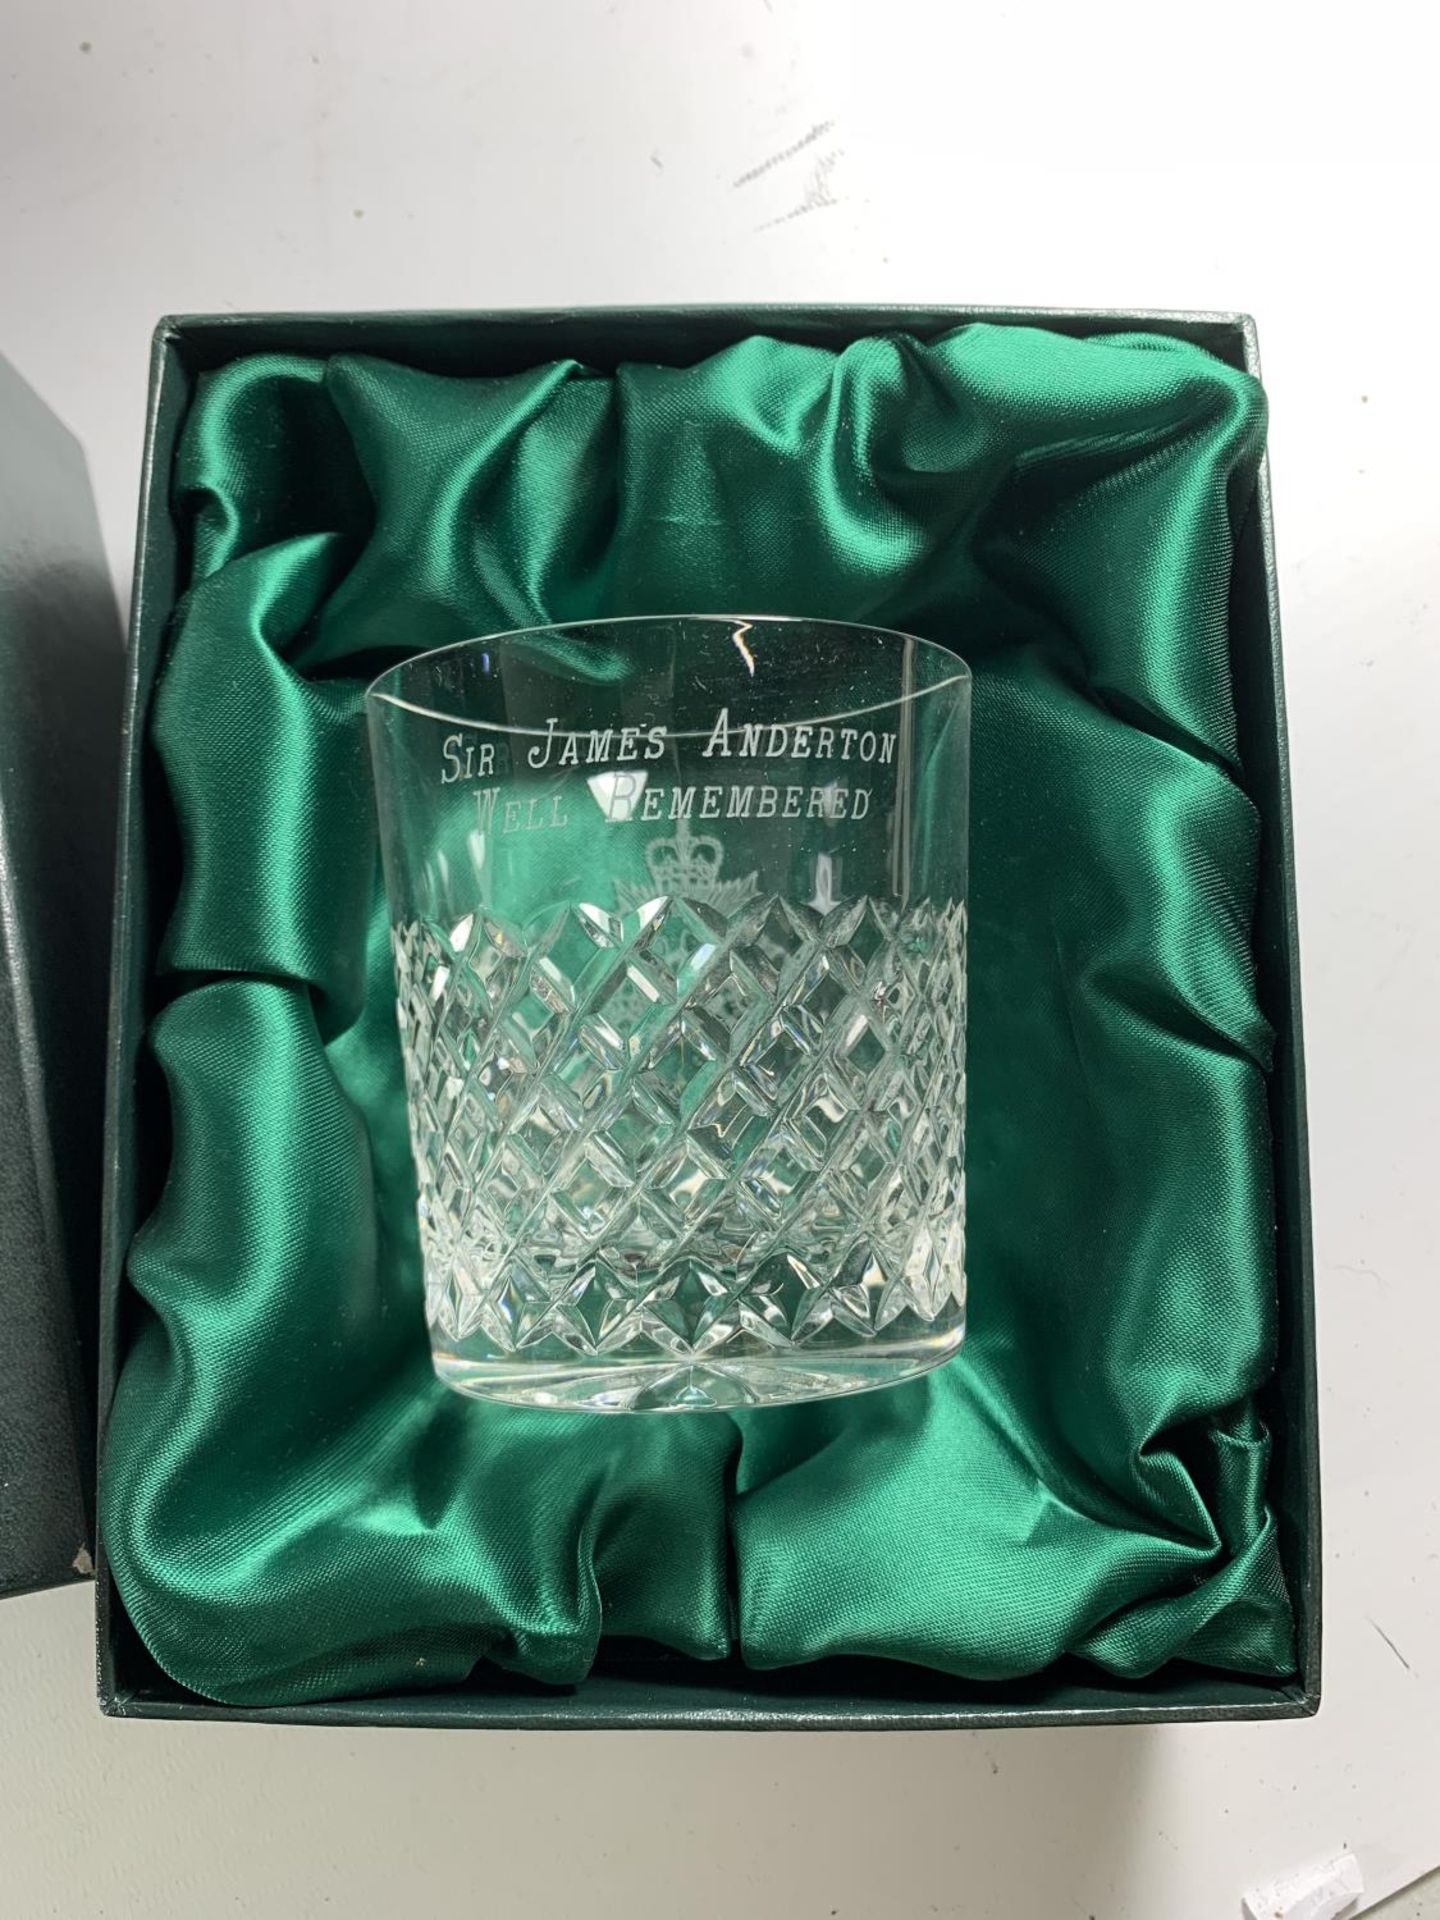 * THREE BOXED ITEMS OF PRESENTATION GLASS, WHISKY GLASS FROM ISLE OF MAN POLICE, DECANTER FROM - Image 6 of 10